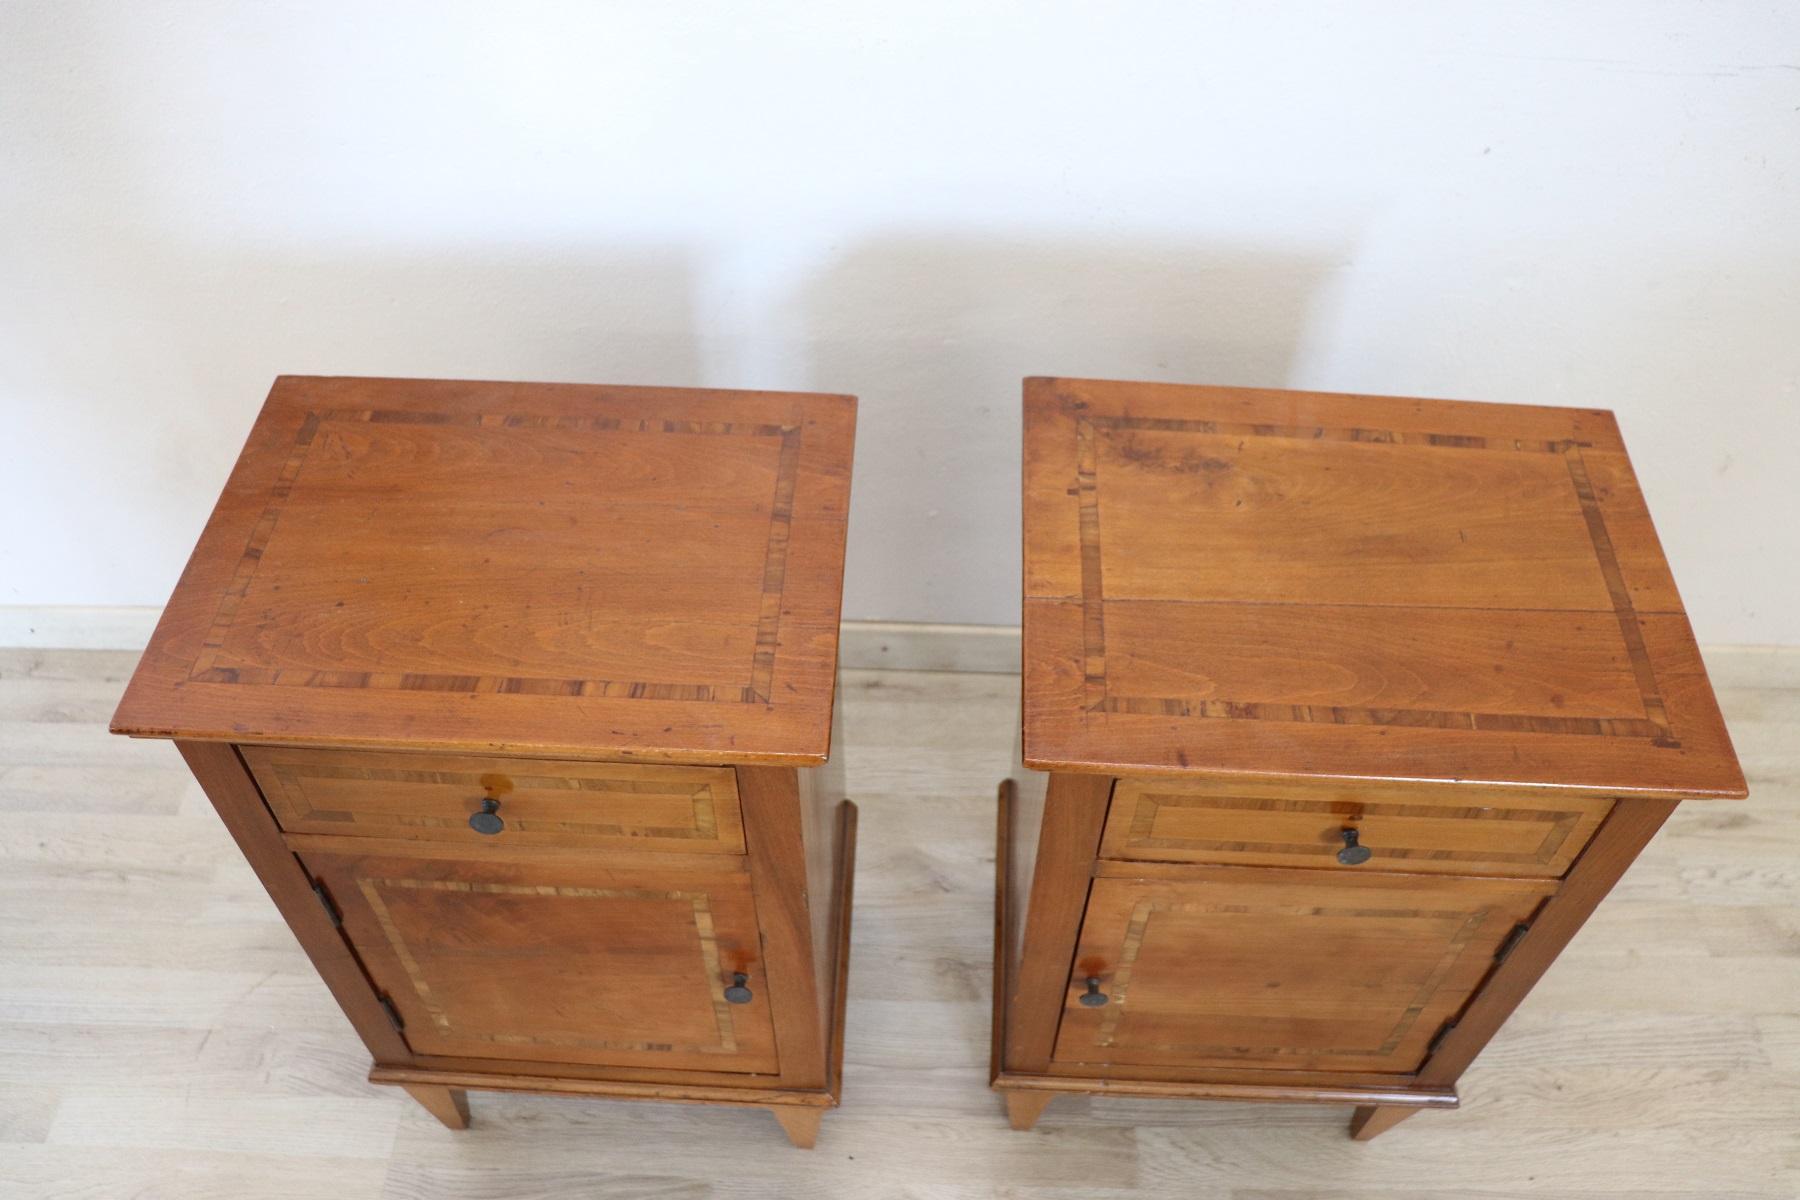 Very beautiful Italian Louis XVI style pair of nightstands in solid walnut wood. Delicate and refined geometric decoration inlaid with precious rosewood. The line is very simple and perfect to be combined with a modern bed. Perfectly restored.